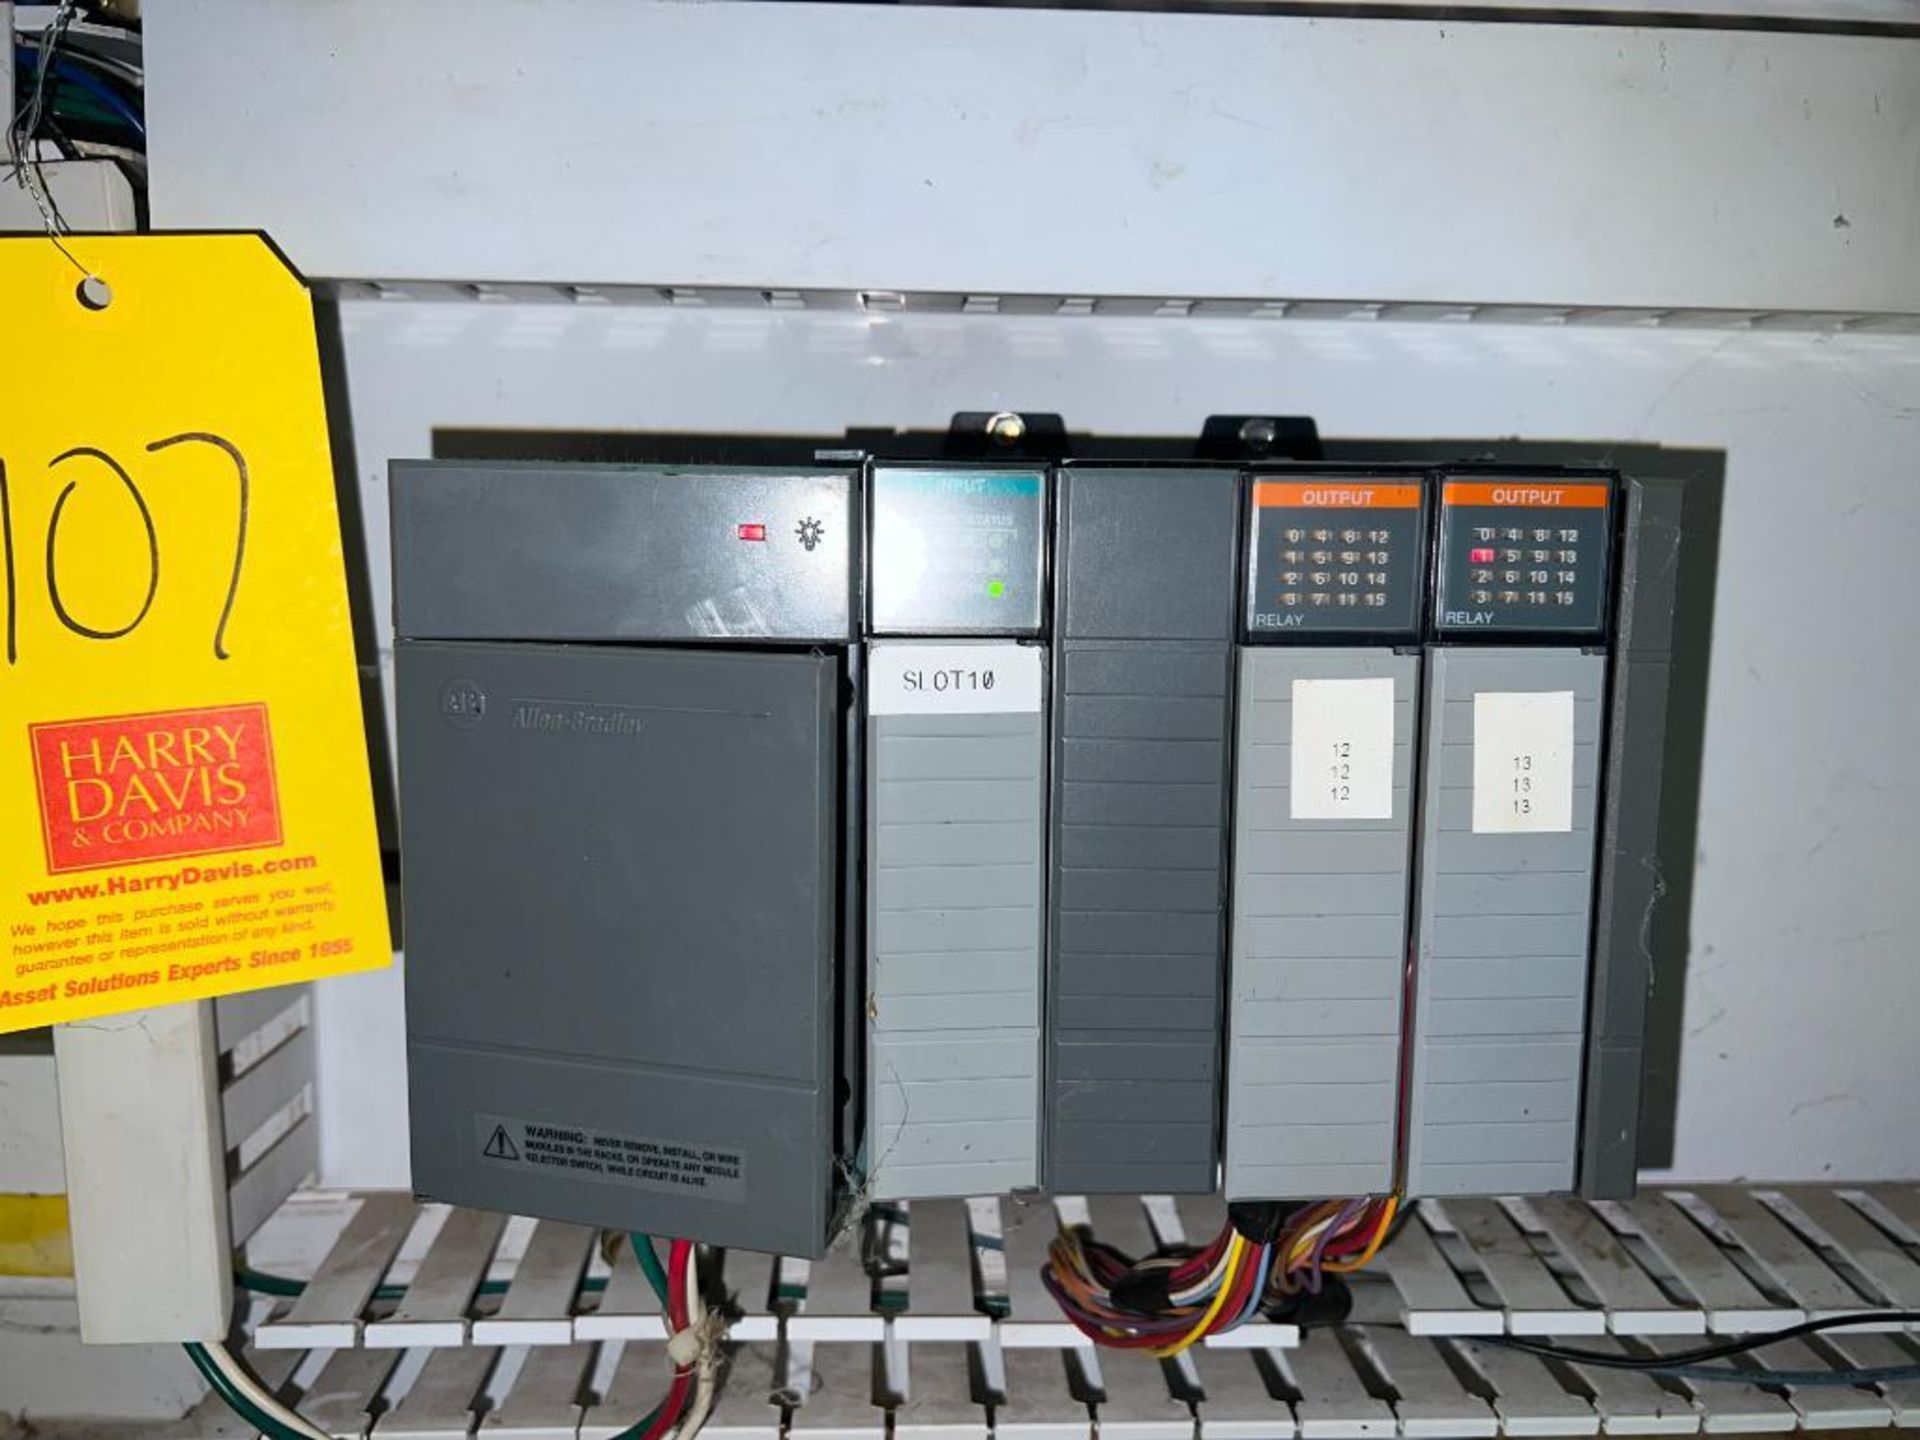 Allen-Bradley SLC 5105 CPU with (11) I/O Cards Modules, Breakers, Allen-Bradley Power Supply and Enc - Image 2 of 3